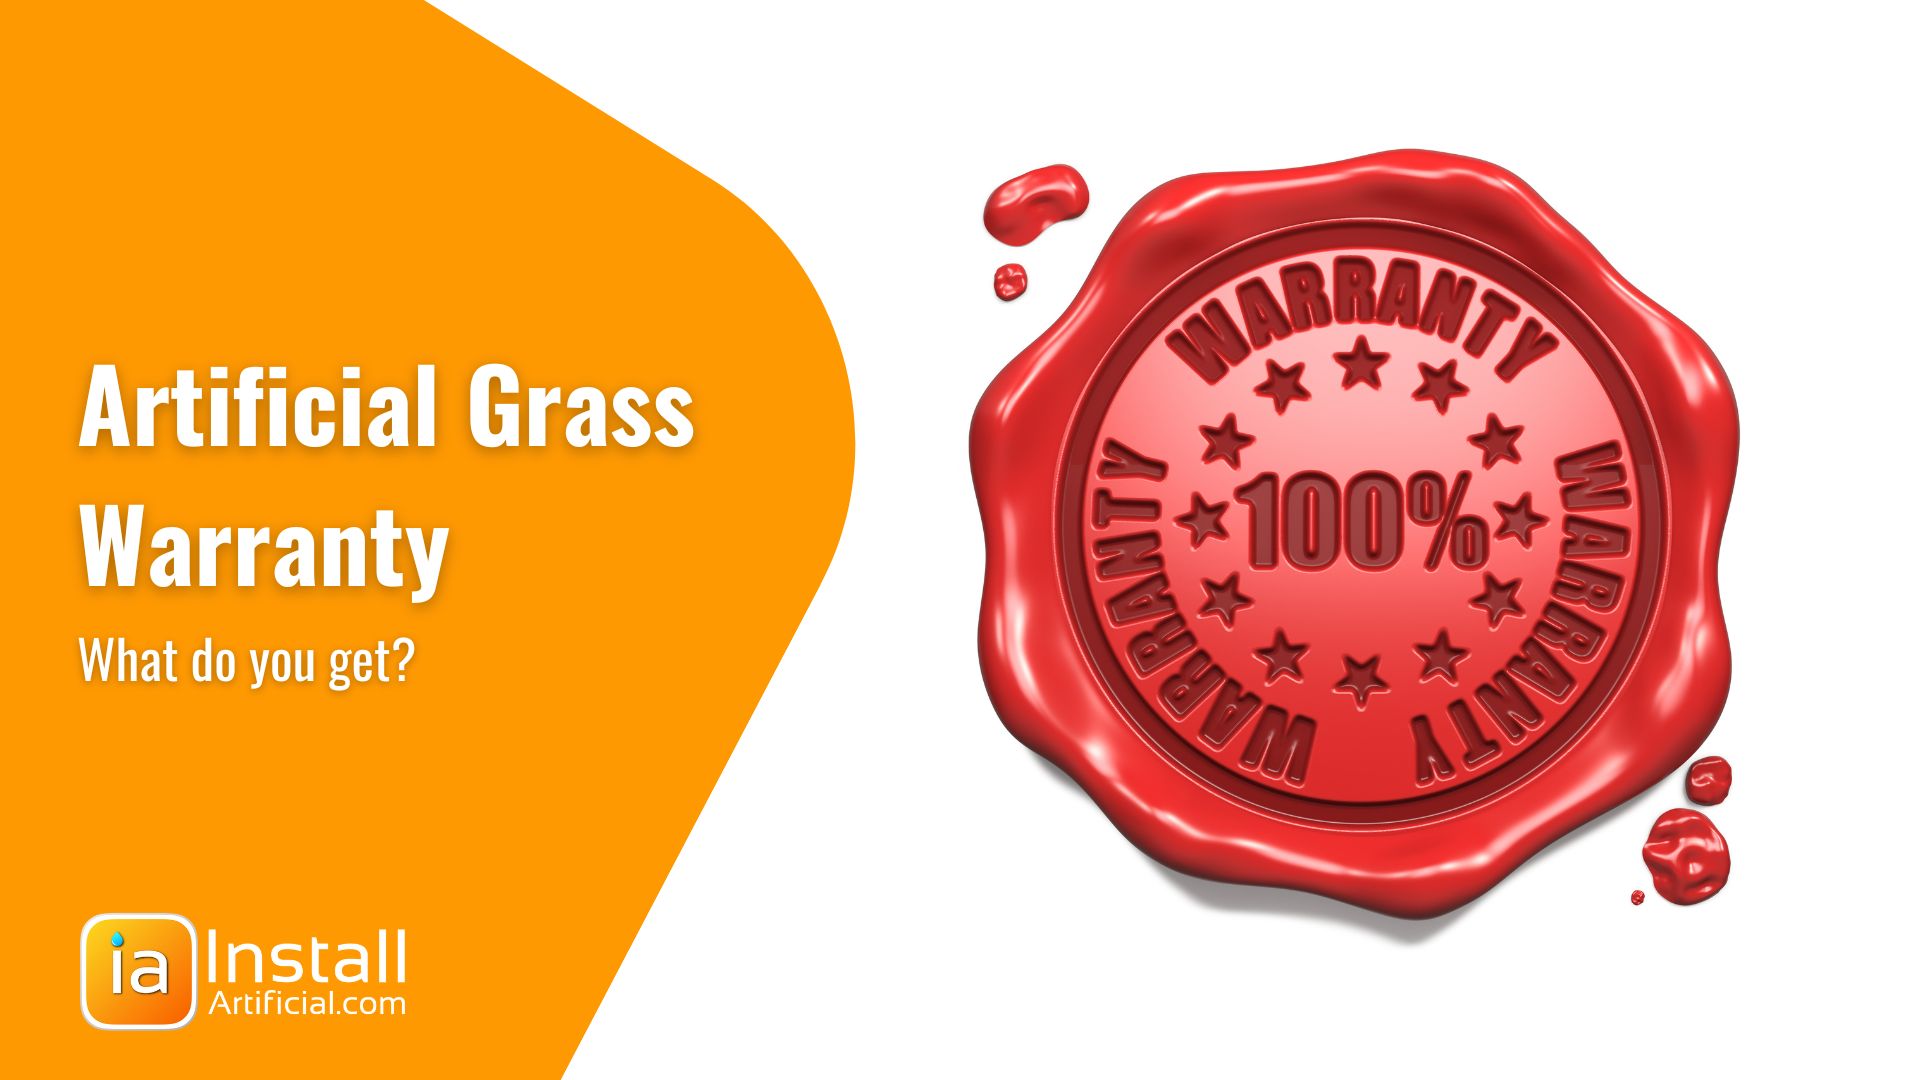 Compare Artificial Turf Warranty Of The Best Artificial Grass Brands